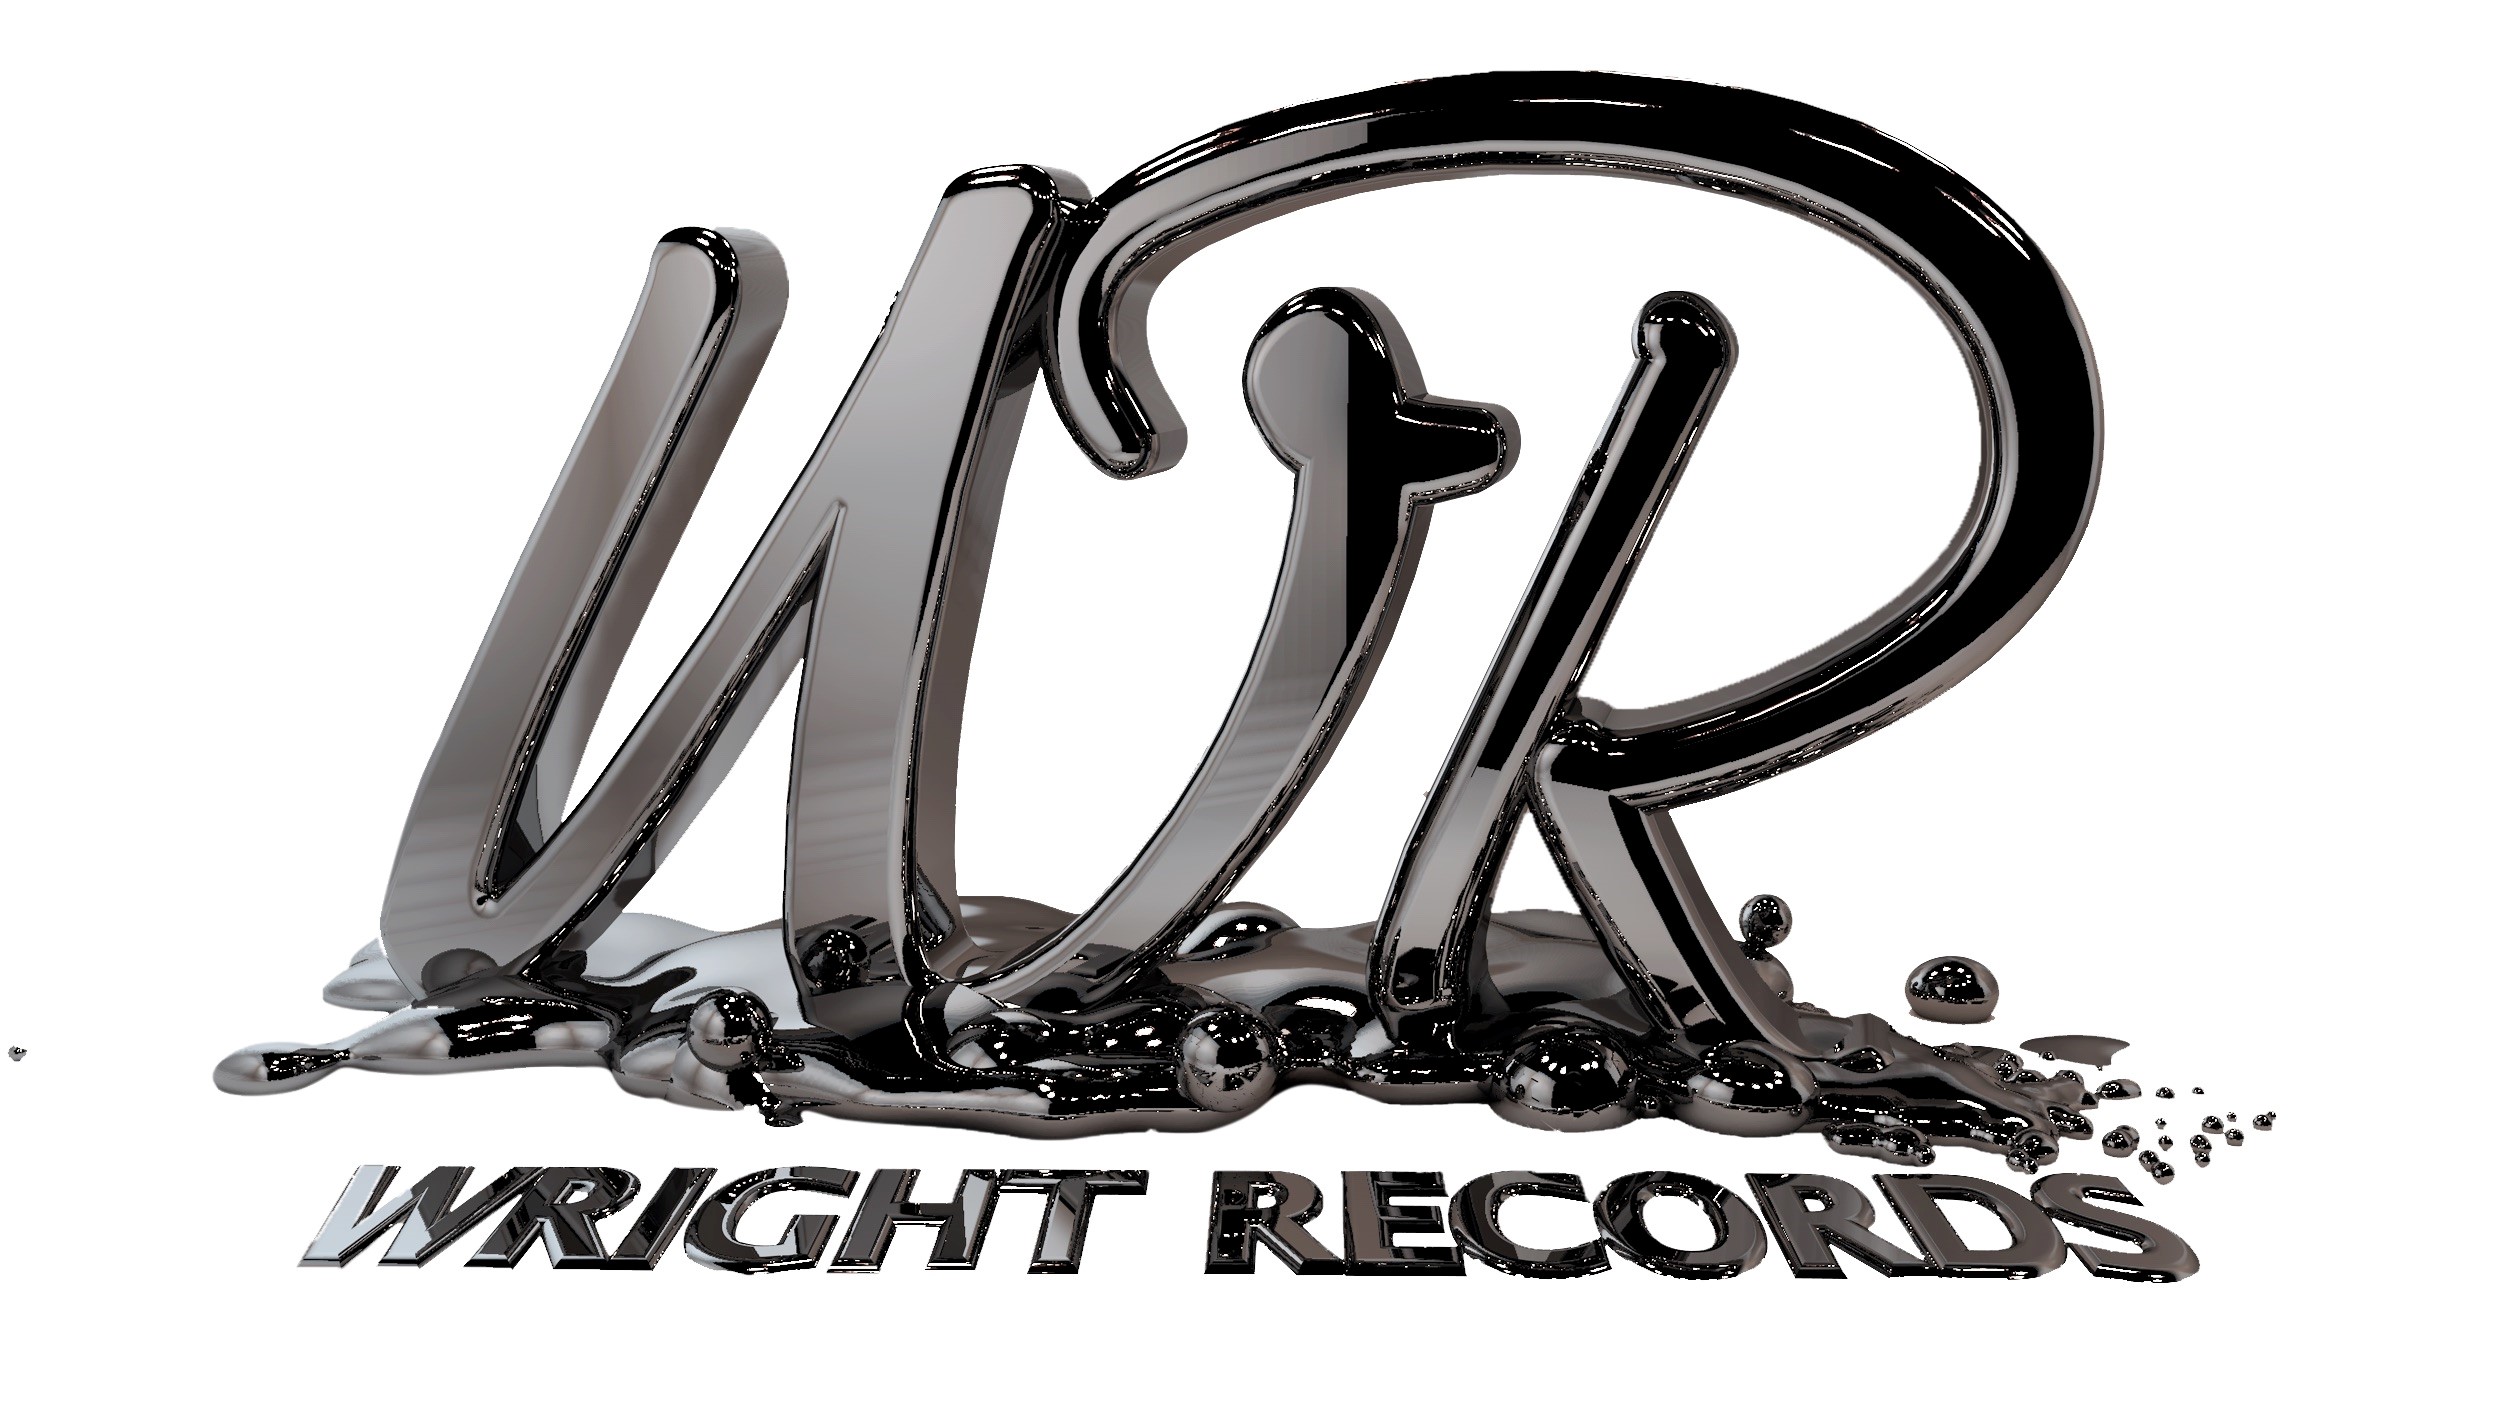 Wright Records, Inc. Sony Music Entertainment/ The Orchard is the music industry’s premier artist development record label. Their website can be reached at